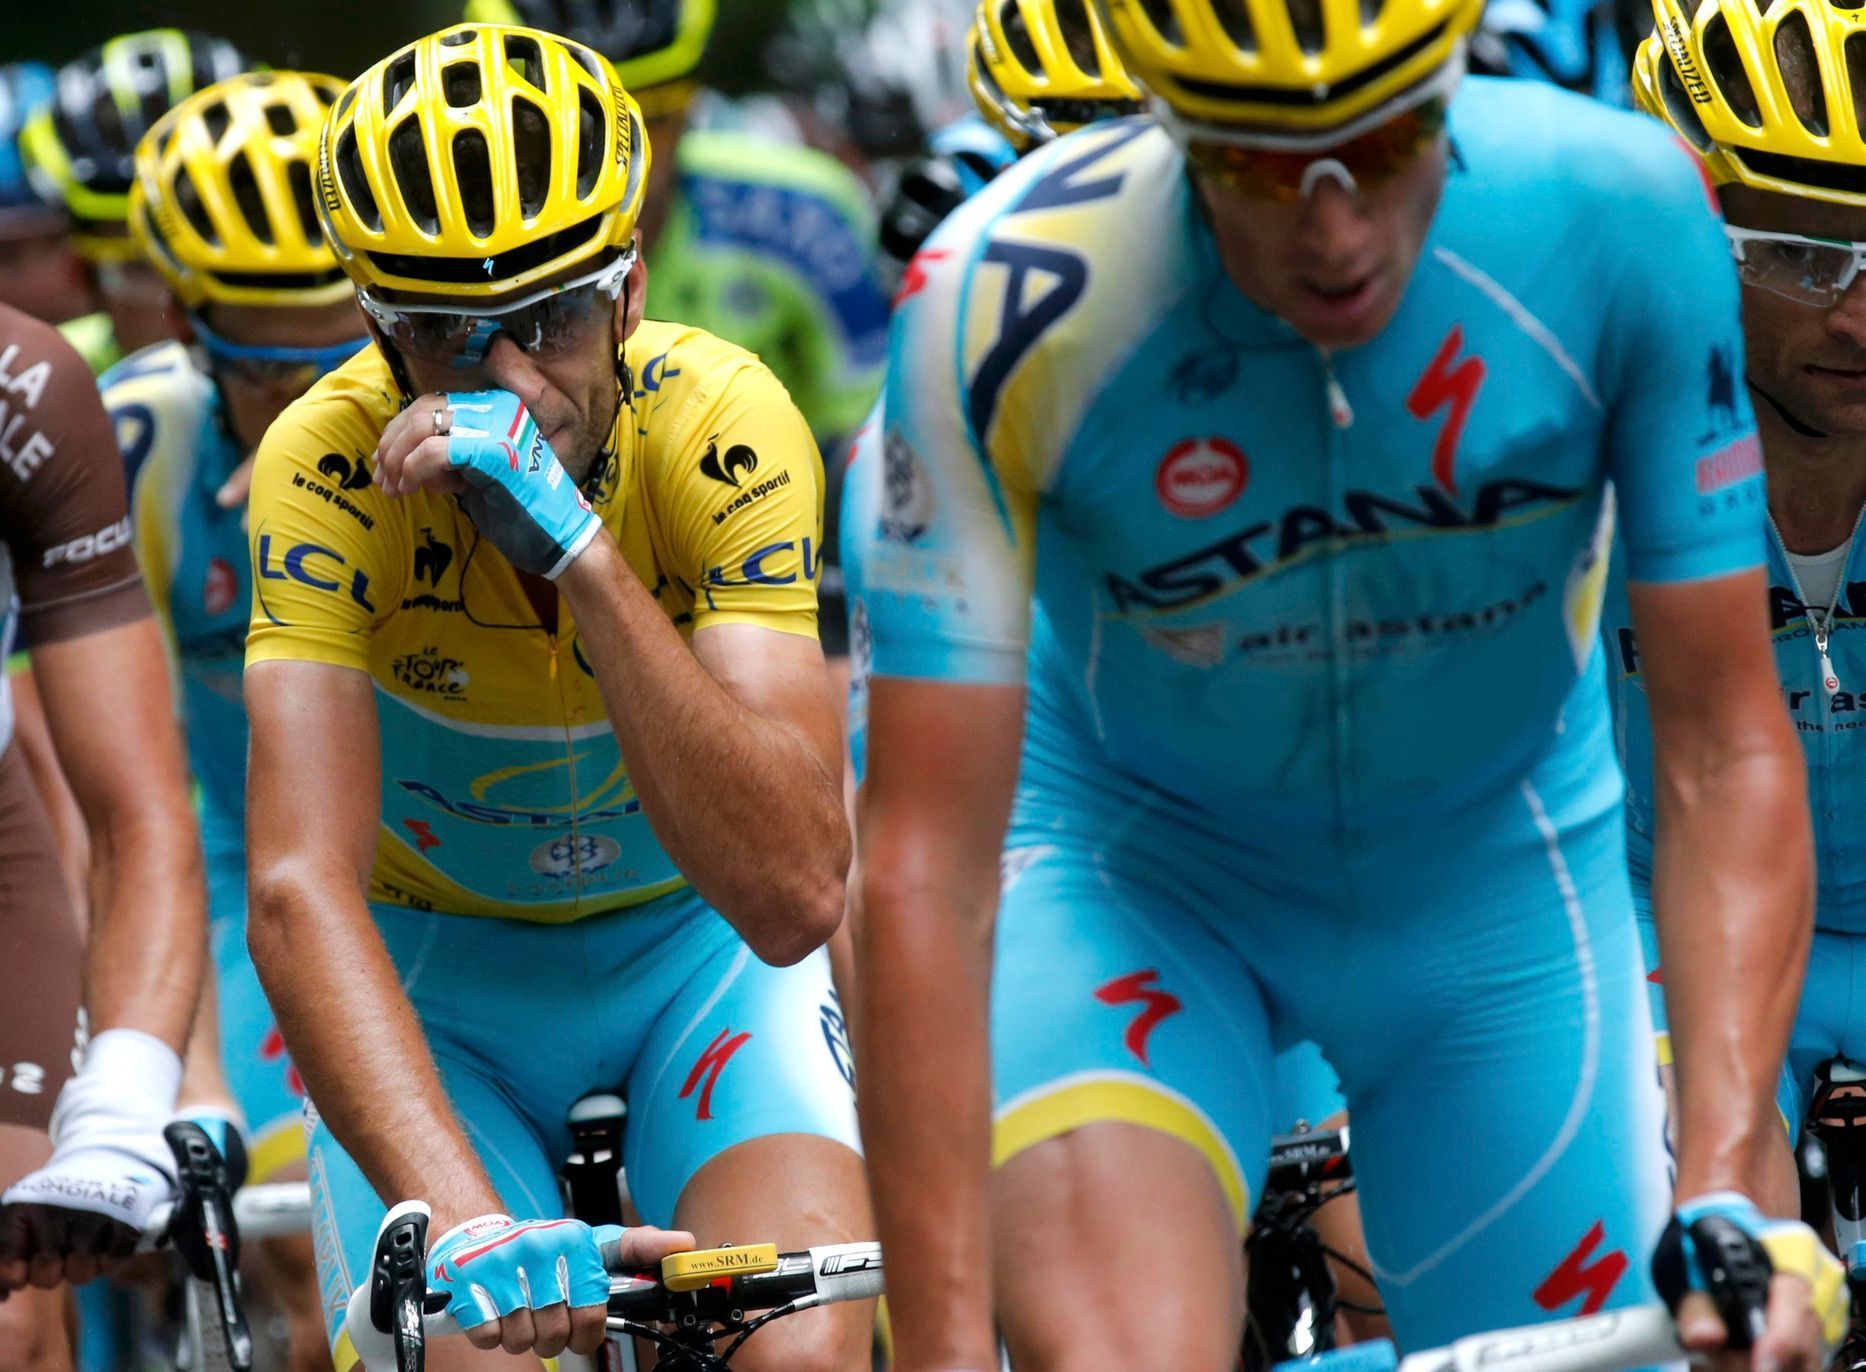 Astana team rider Nibali of Italy reacts as he cycles in the pack during the 170-km ninth stage of the Tour de France cycling race between Gerardmer and Mulhouse